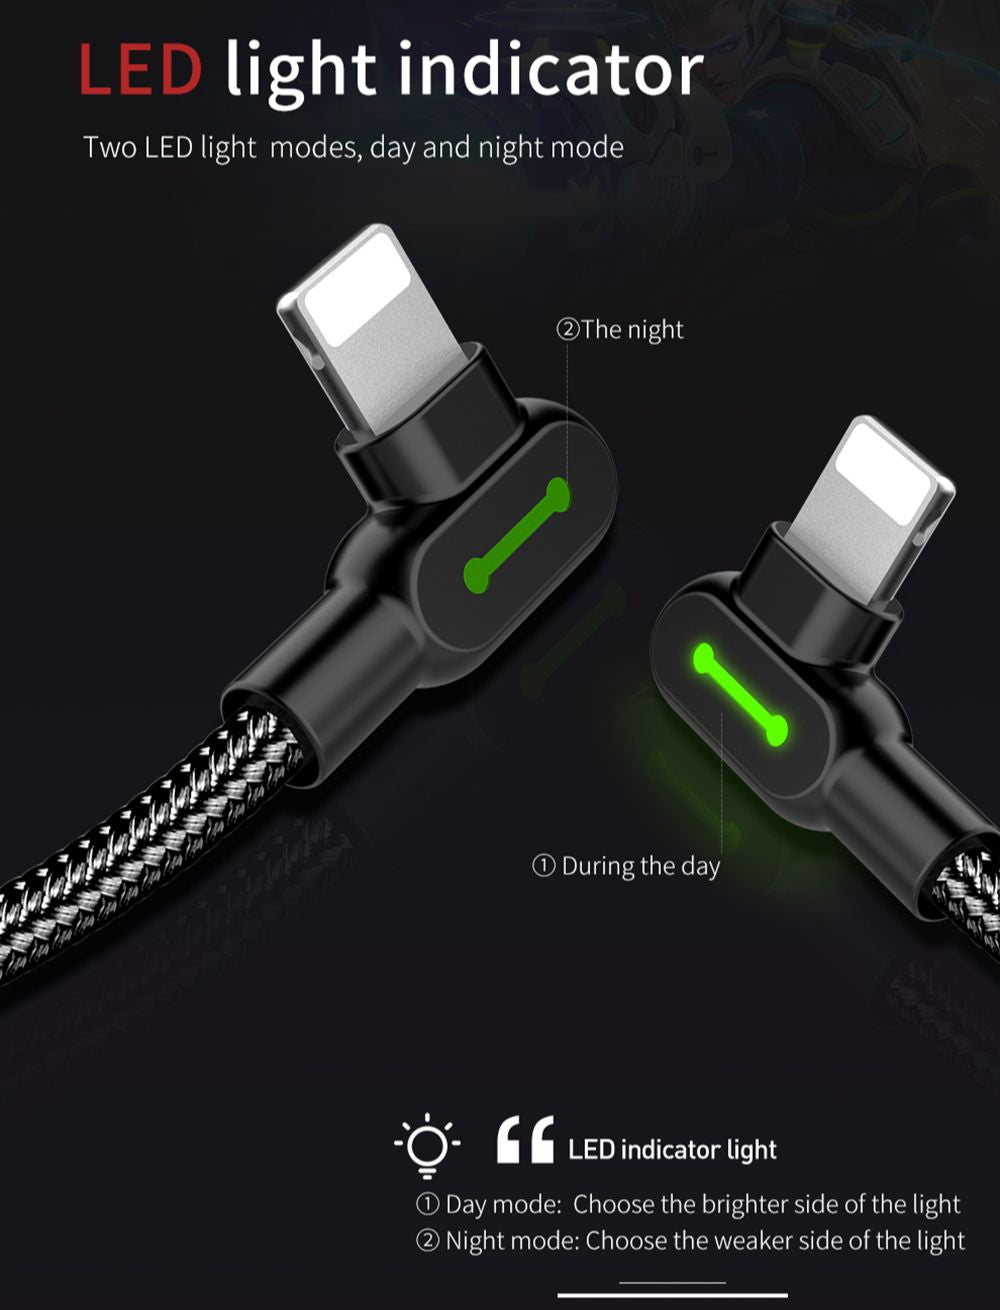 "High-Speed USB Cable for Lightning, Micro USB, and Type-C Devices - Compatible with Iphone 14, 13 Pro Max, 12, 11, XR, 8, 7, and 6S - Fast Charging Capabilities"